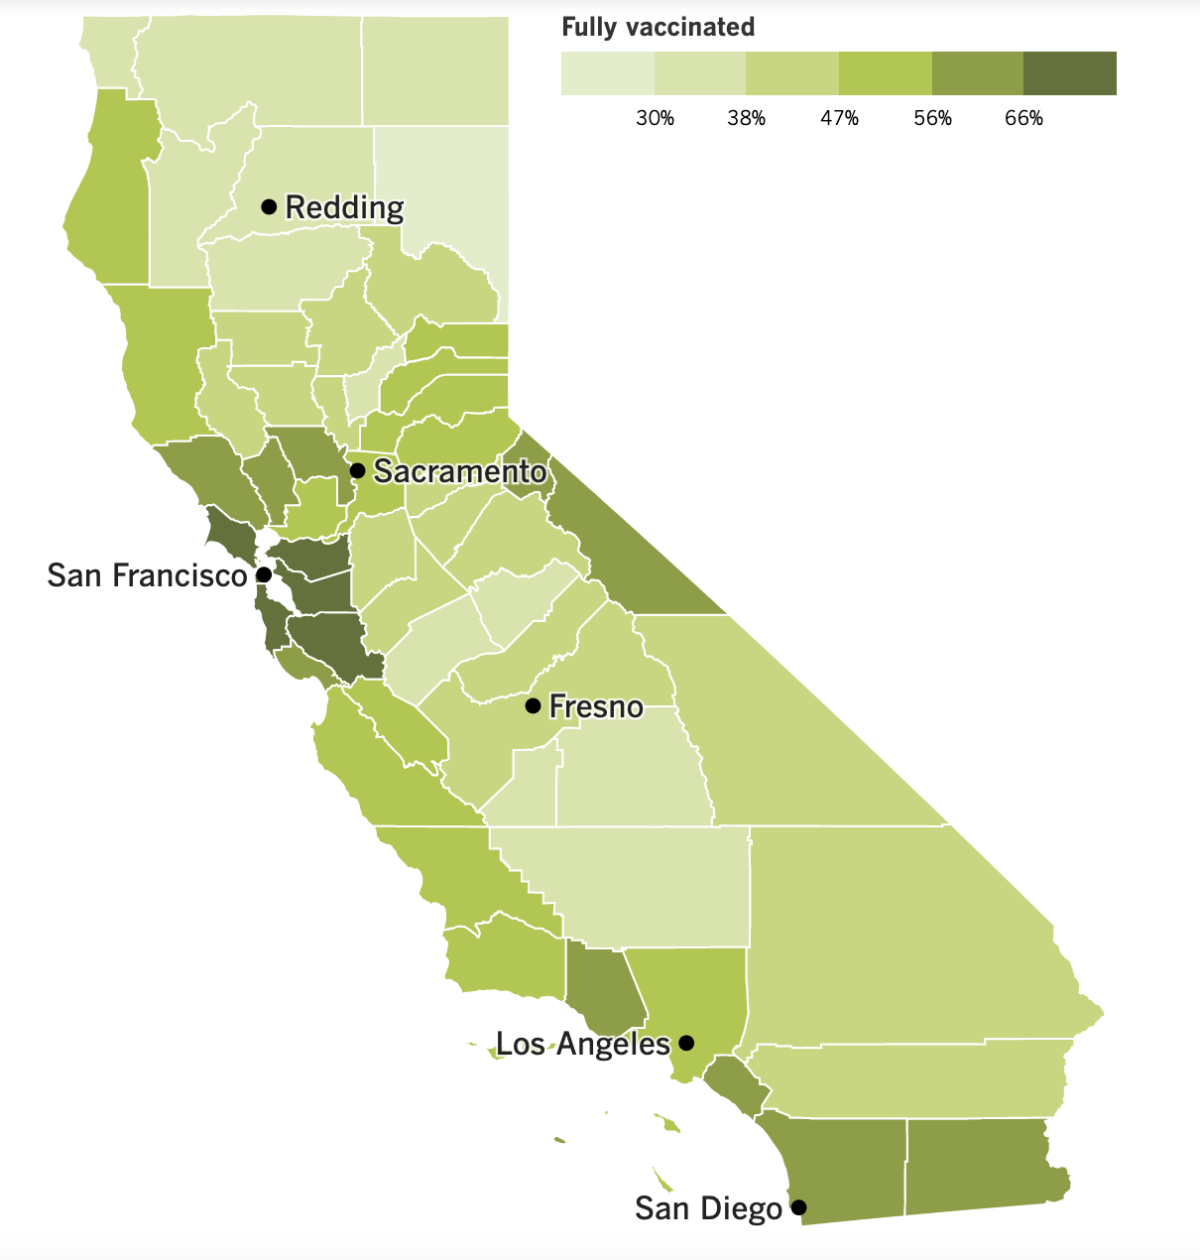 A map of California showing the vaccination rate by county